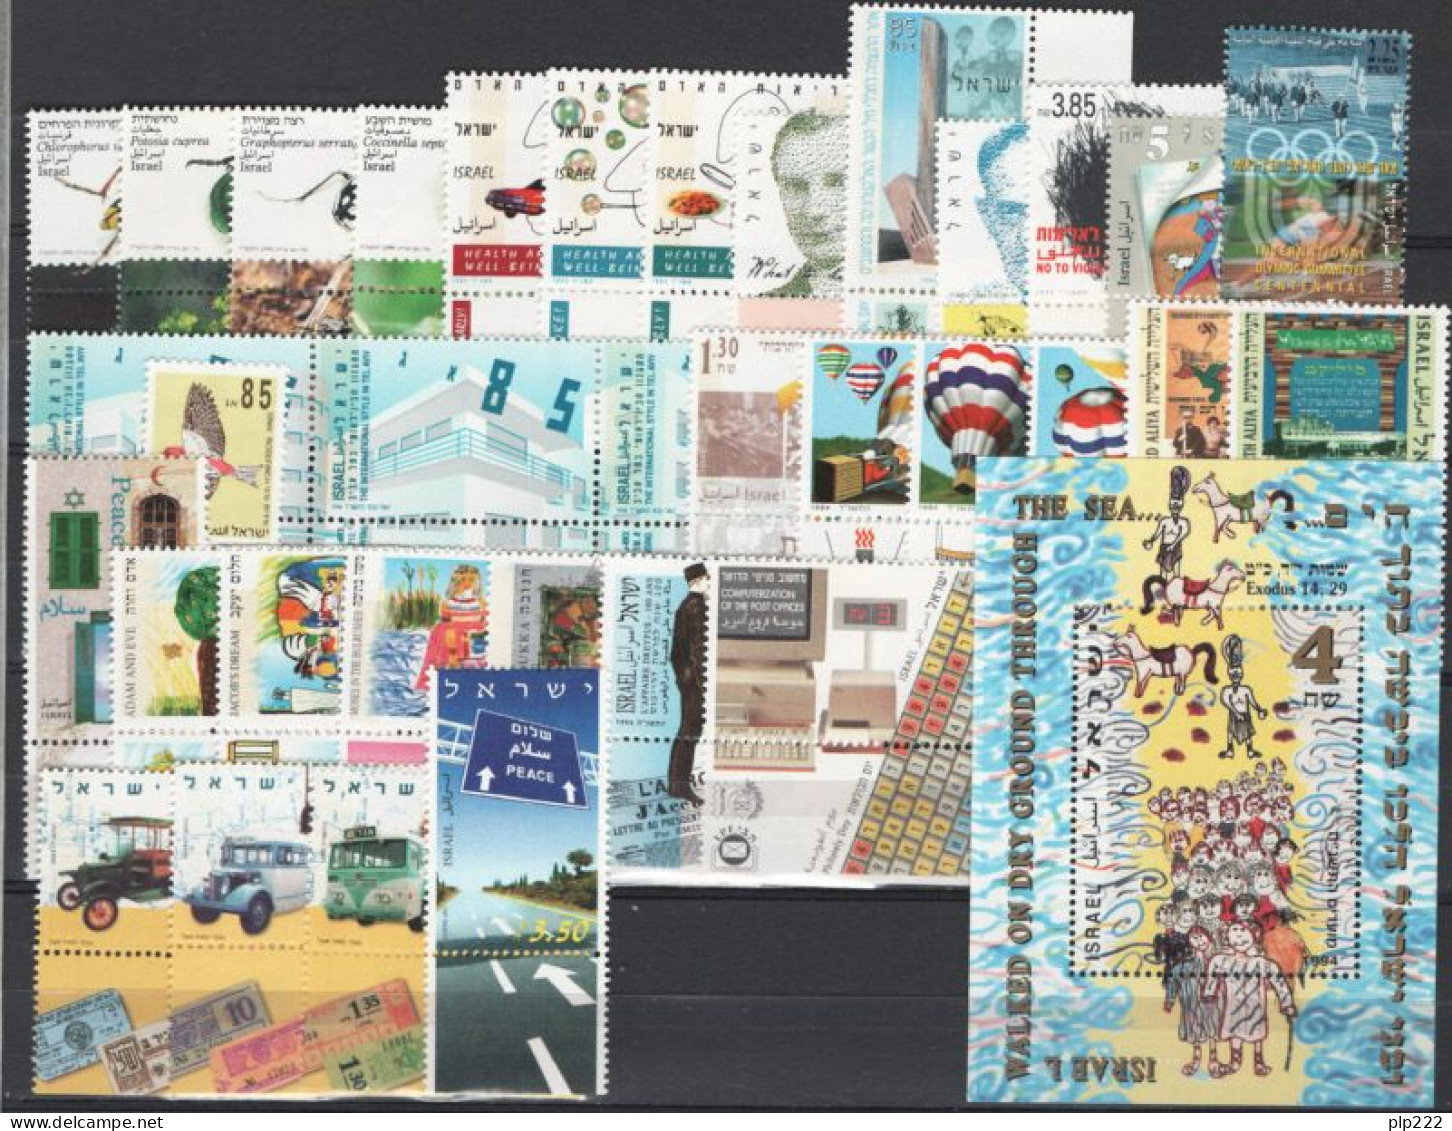 Israele 1994 Annata Completa Con Appendice / Complete Year Set With Tab **/MNH VF - Annate Complete